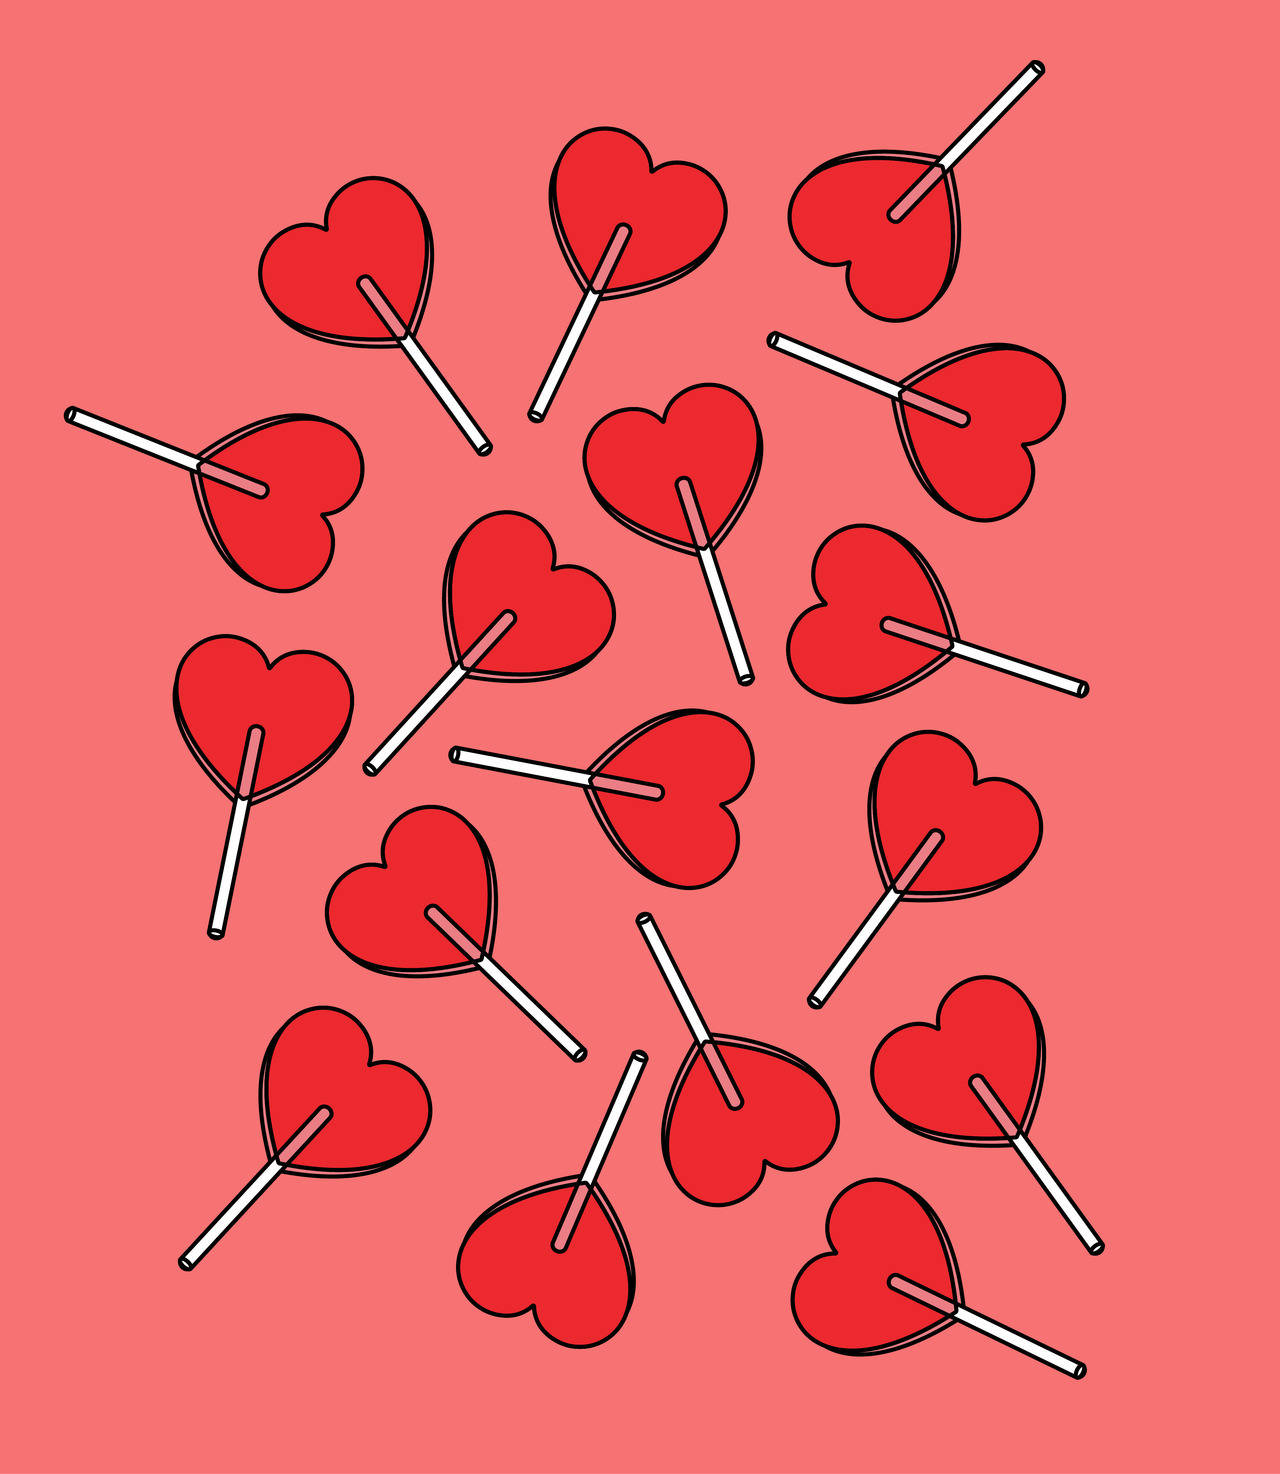 A Group Of Red Lollipop Hearts On A Pink Background Wallpaper